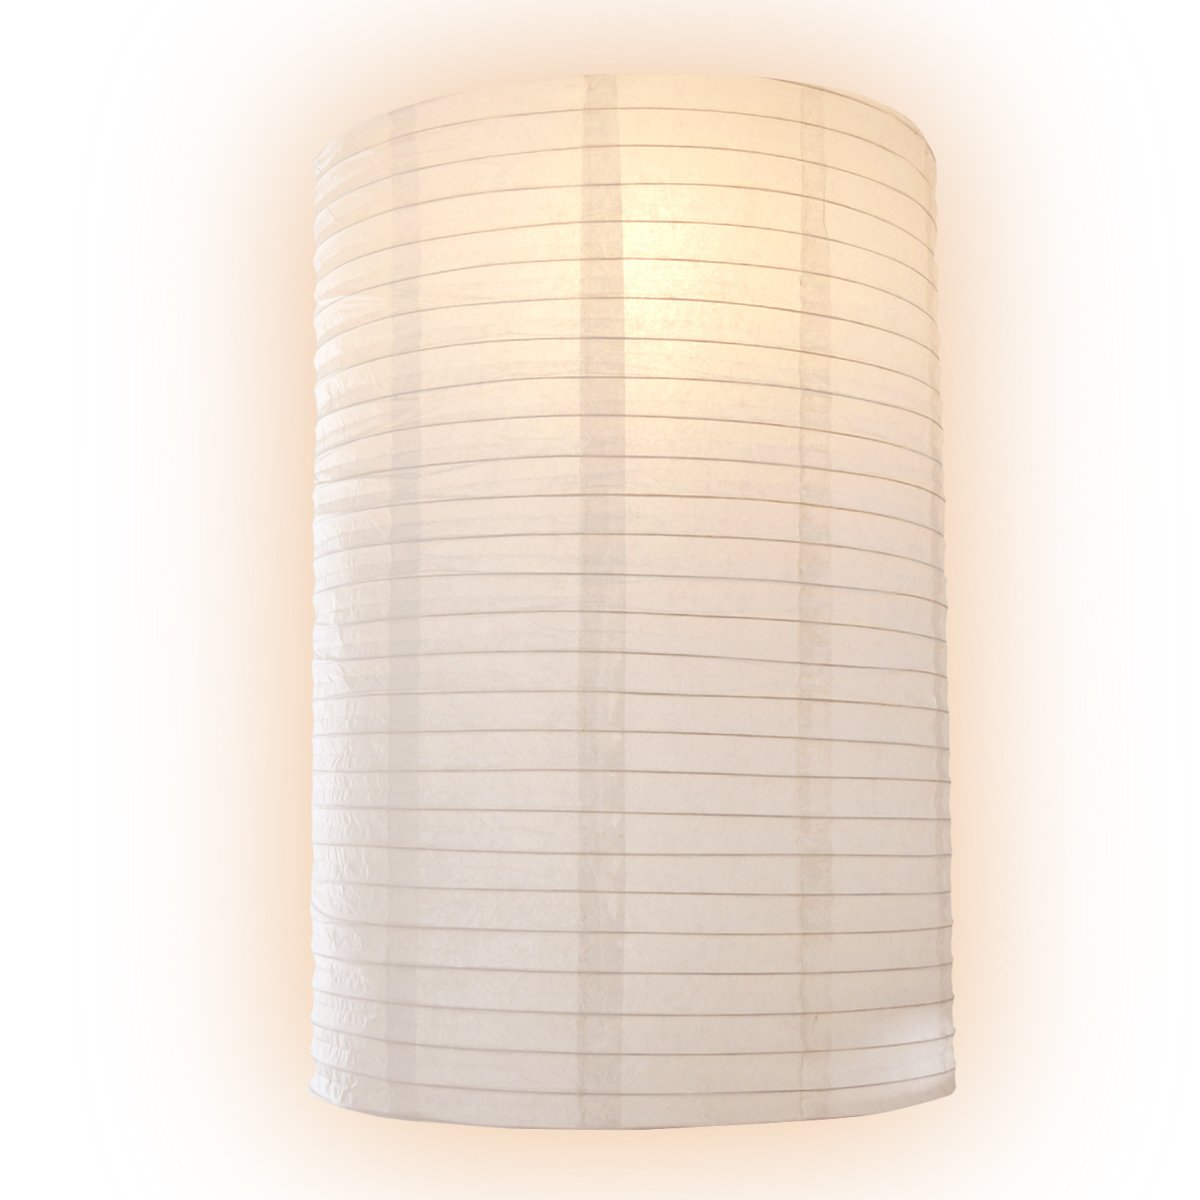 Jumbo White Cylinder Unique Shaped Paper Lantern, 20-inch x 30-inch